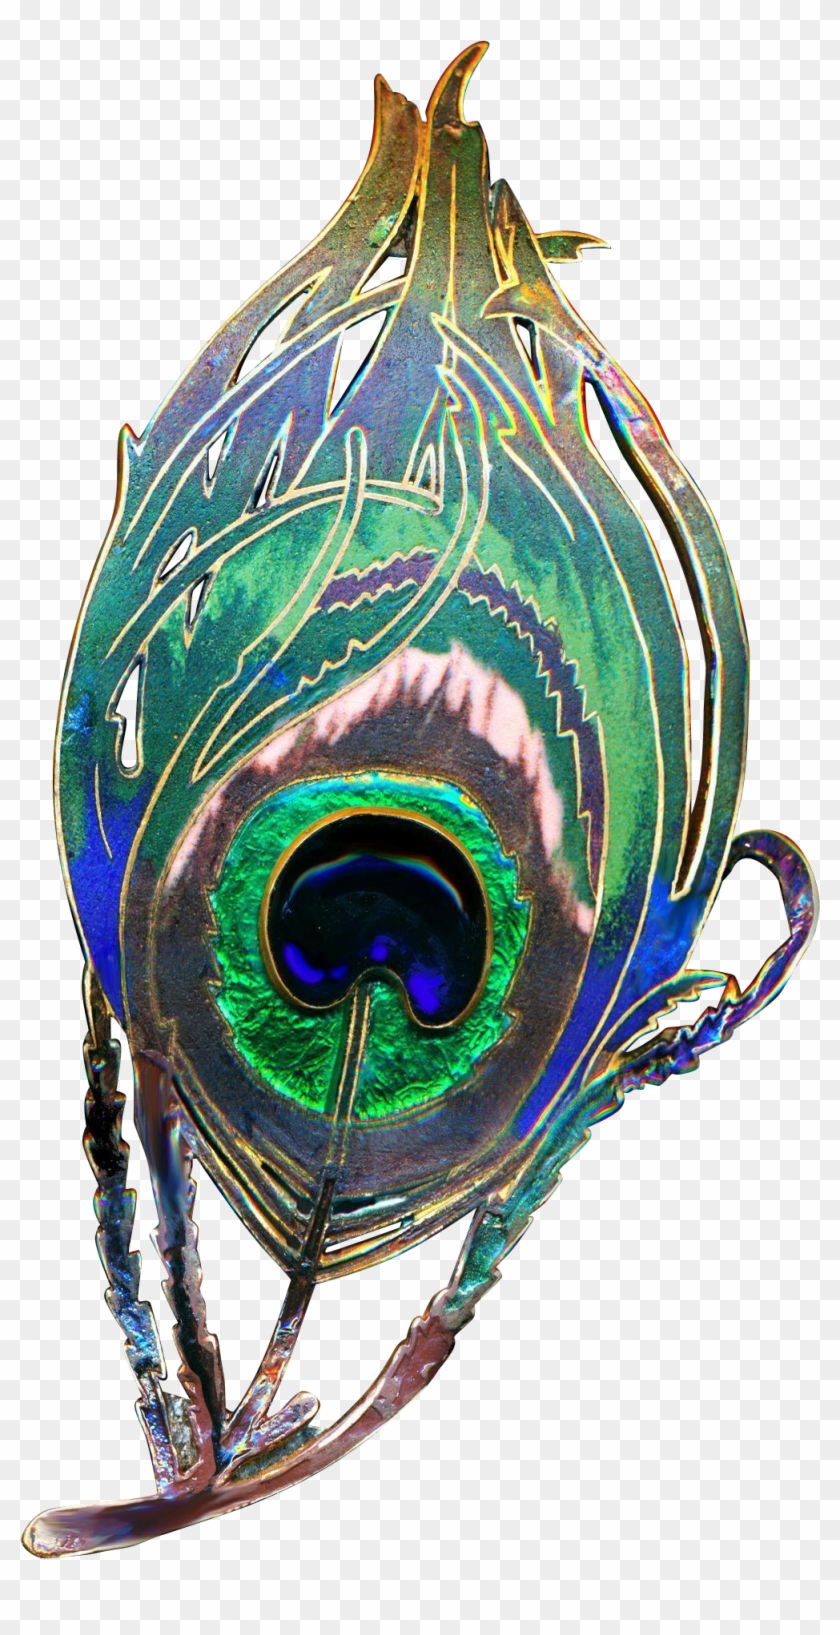 Peacock Feathers, Art Nouveau, Brooch, Jewelry, Jewellery - Visual Arts Clipart #2125509